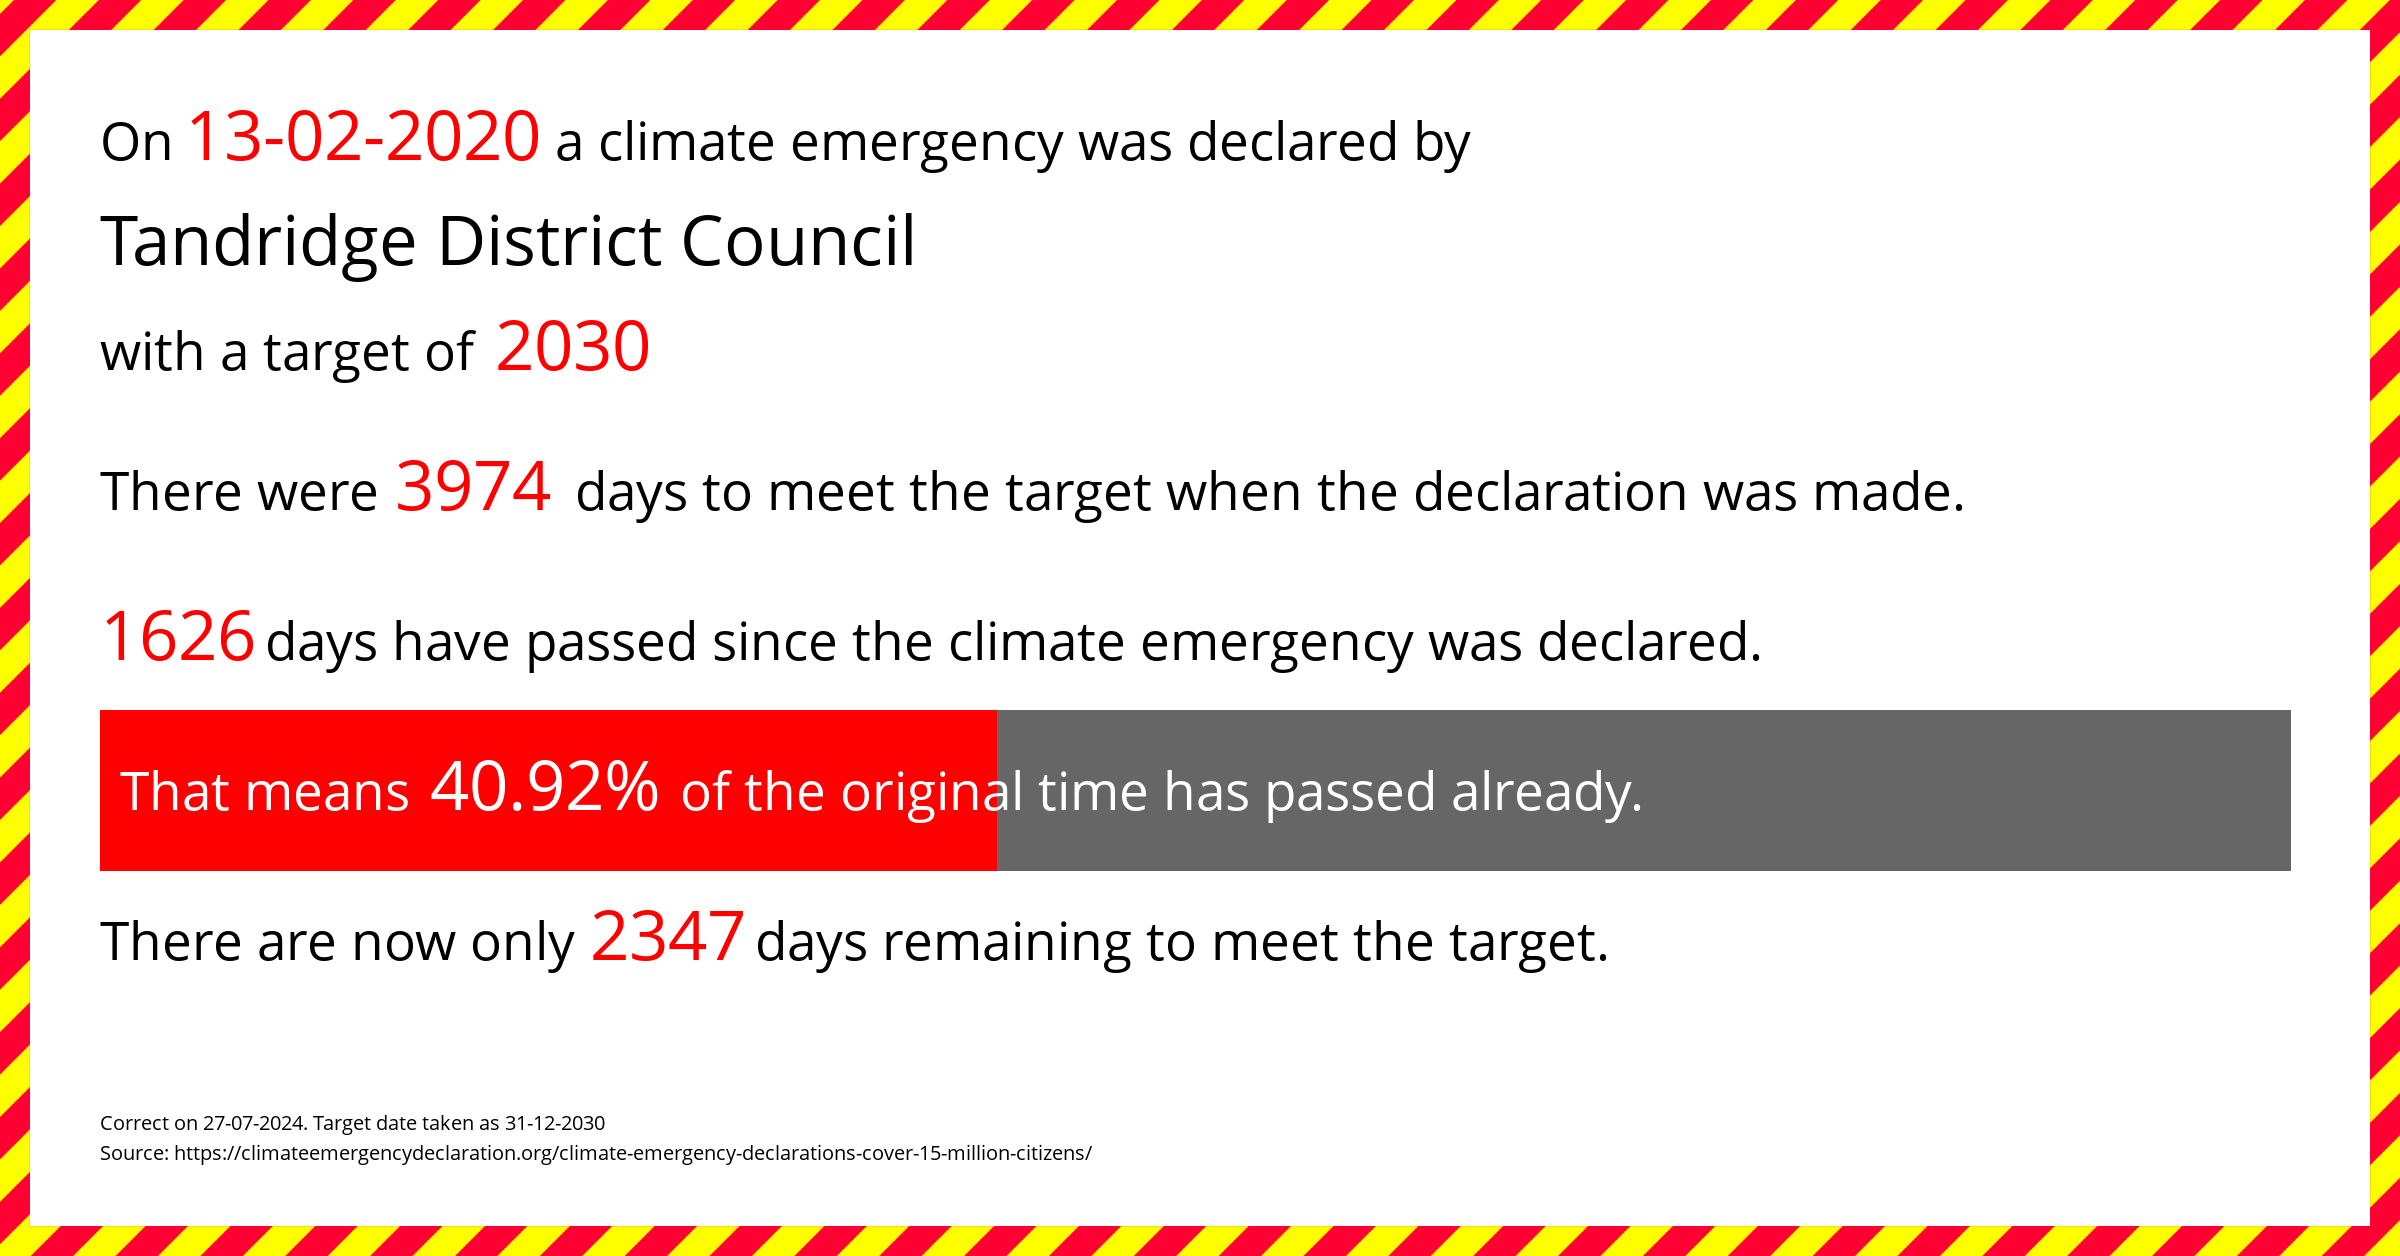 Tandridge District Council declared a Climate emergency on Thursday 13th February 2020, with a target of 2030.